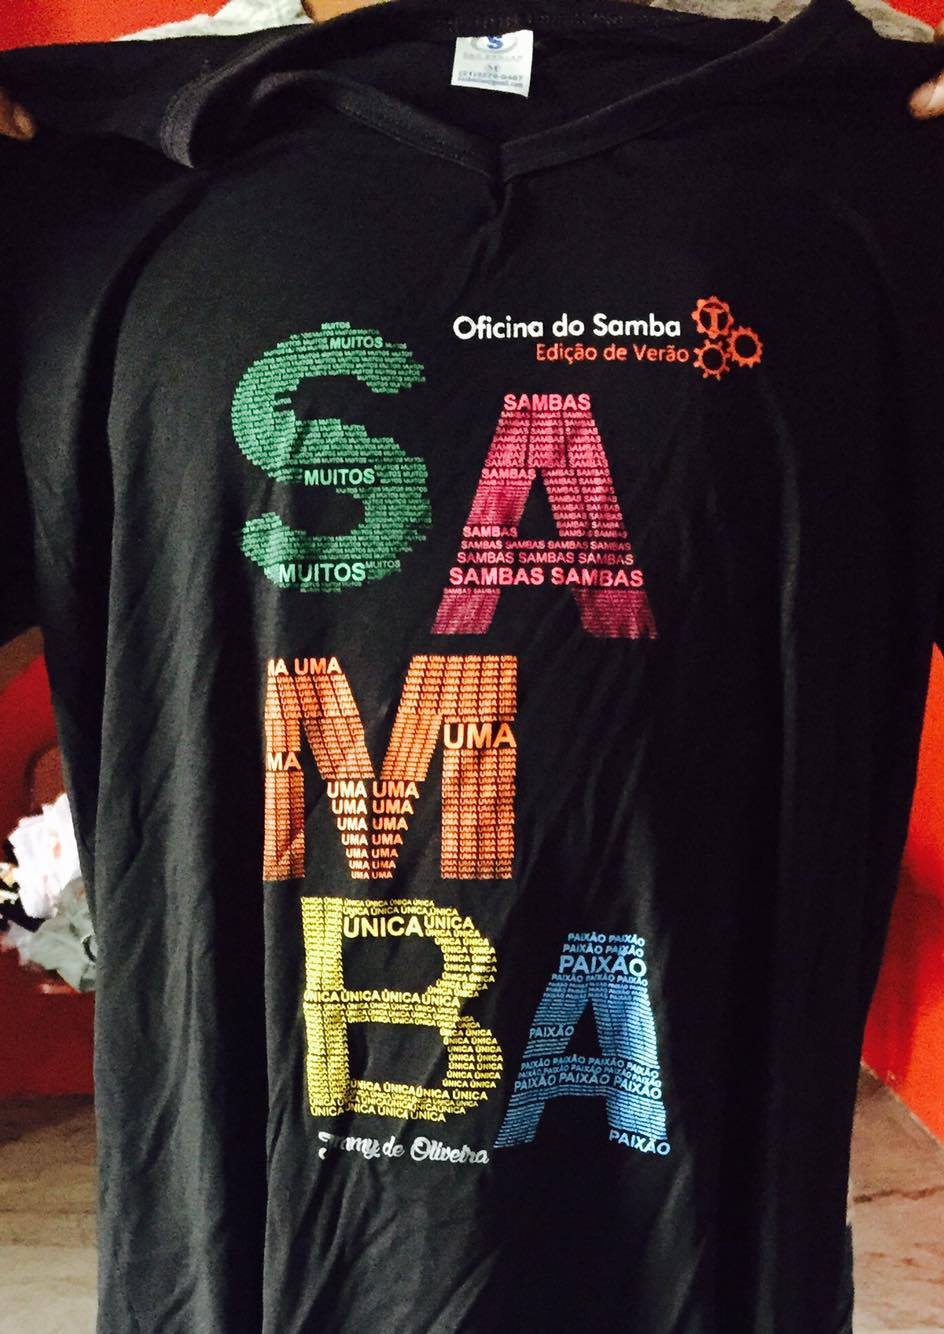 Tshirt from Jimmy de Oliveira declaring- many sambas,, one unique passion. photo by Flavia Amaral